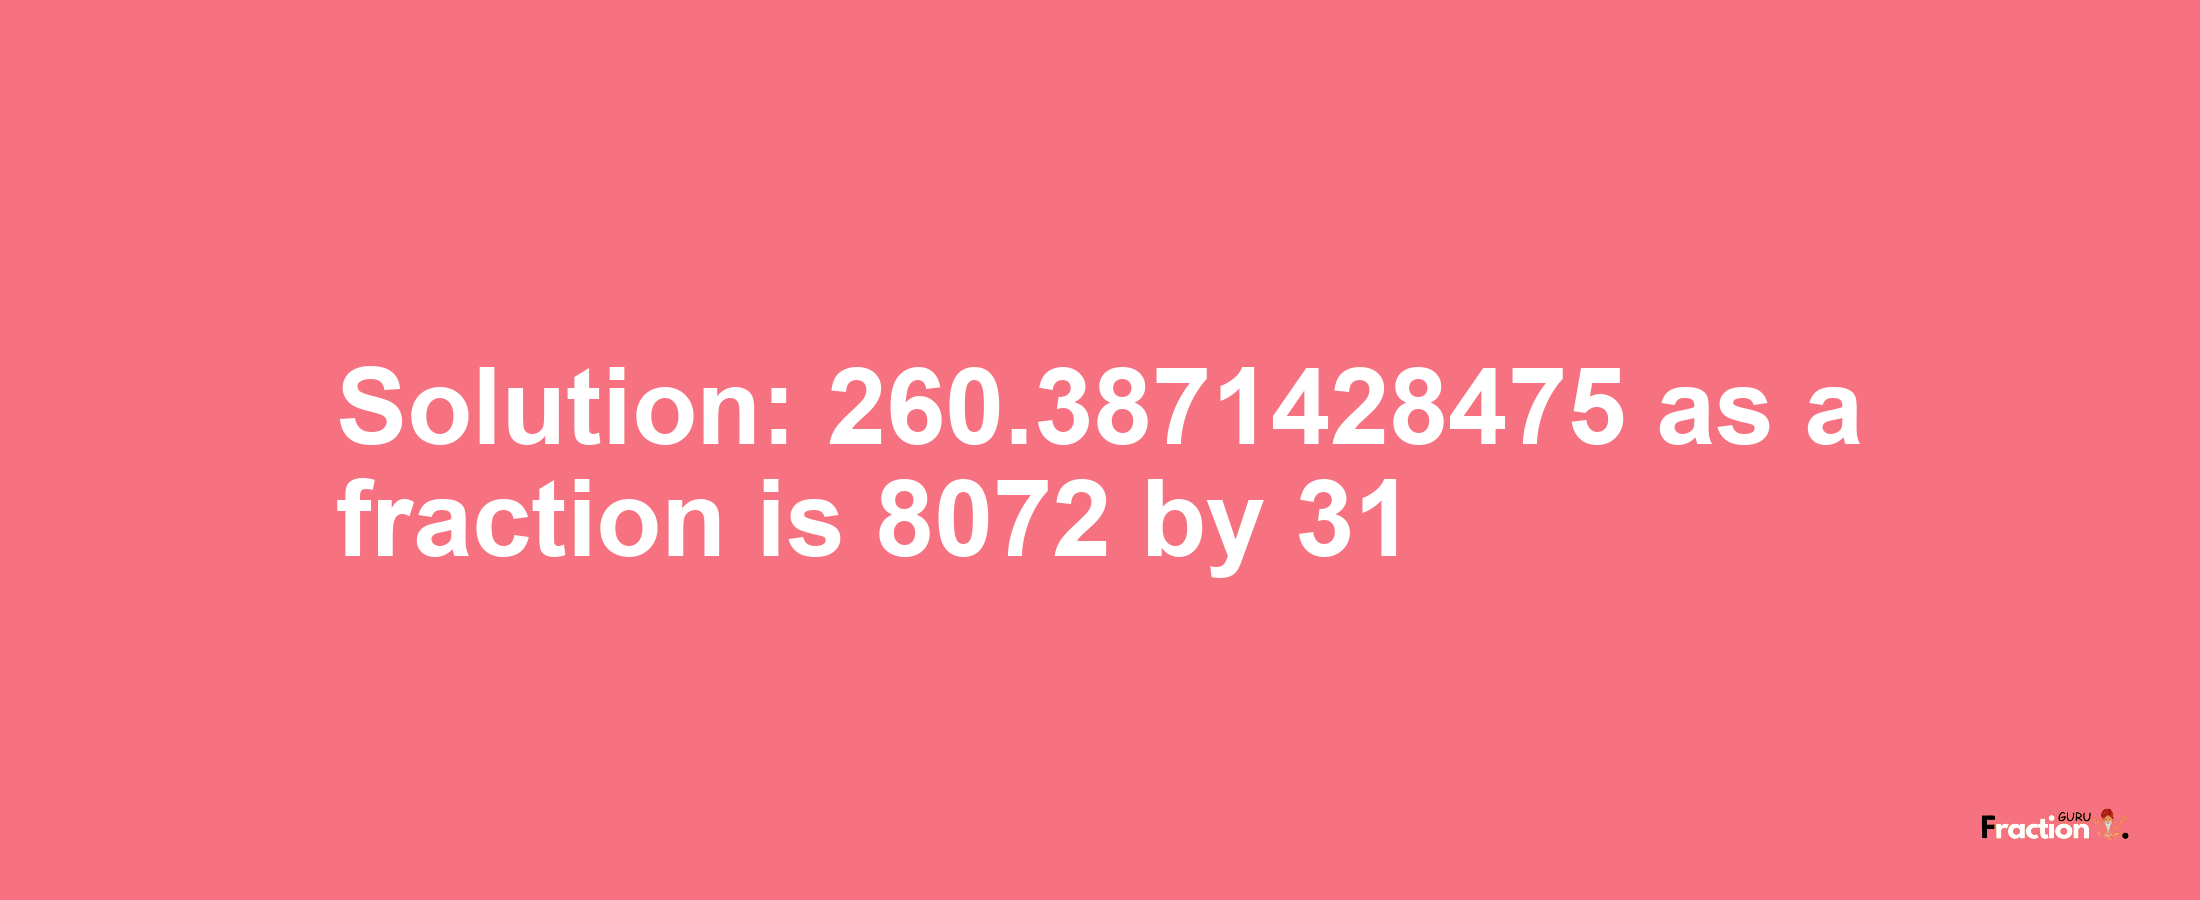 Solution:260.3871428475 as a fraction is 8072/31